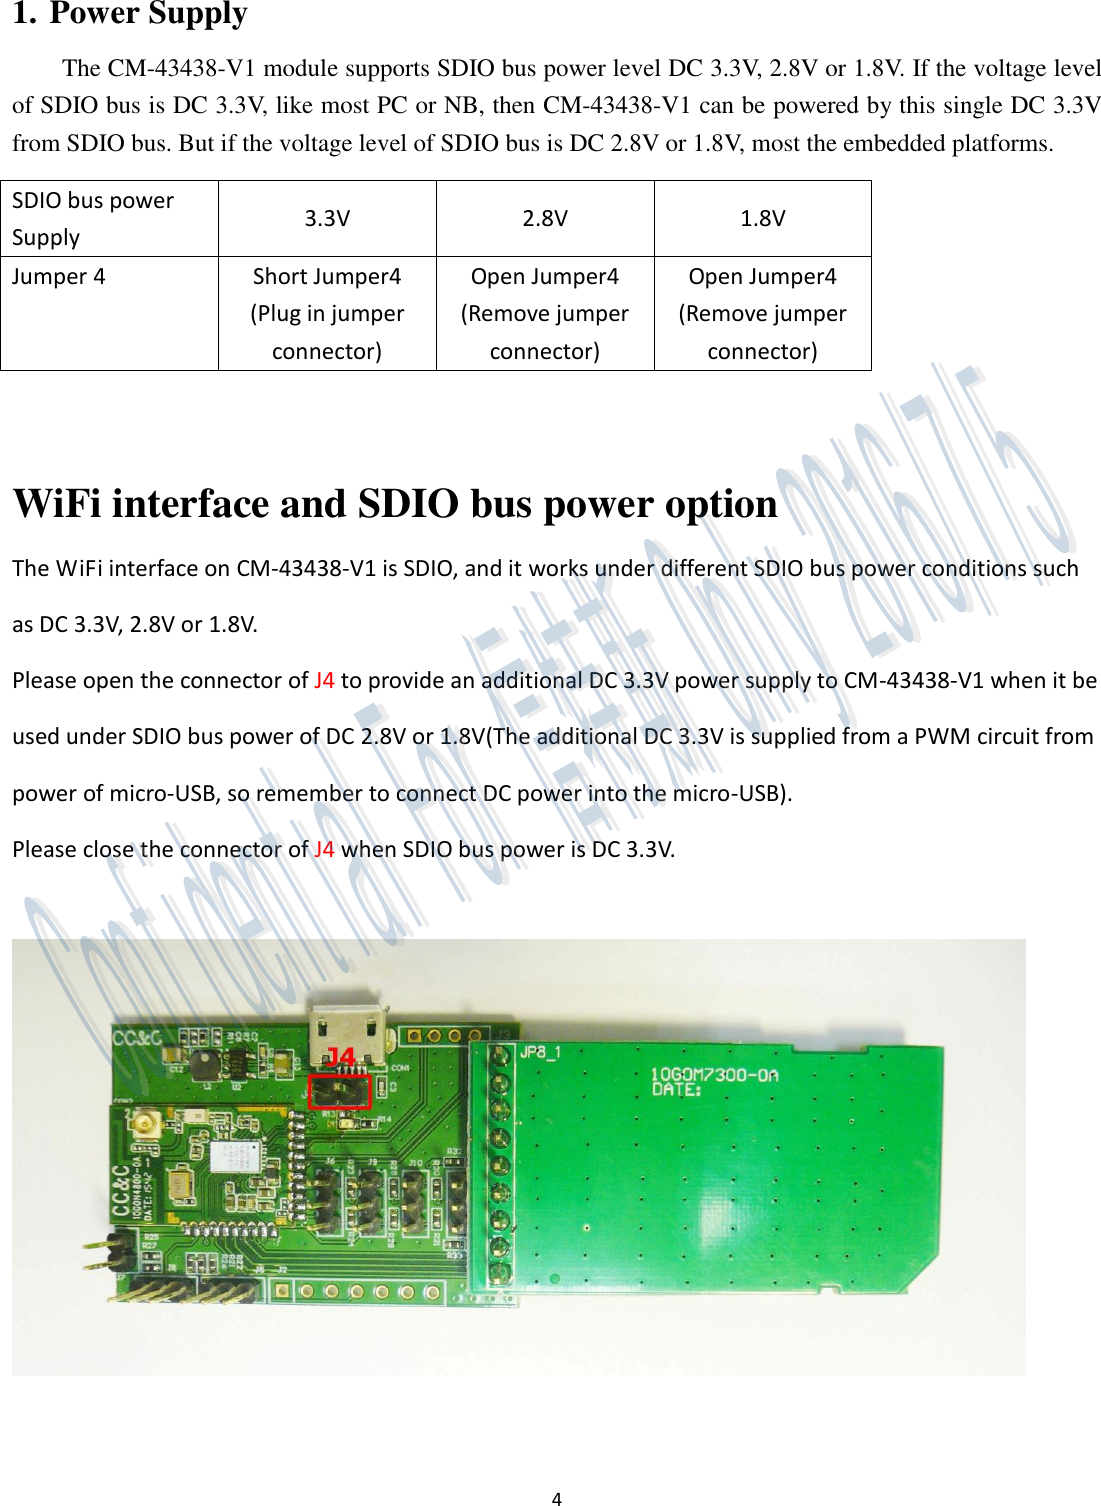 4  1. Power Supply The CM-43438-V1 module supports SDIO bus power level DC 3.3V, 2.8V or 1.8V. If the voltage level of SDIO bus is DC 3.3V, like most PC or NB, then CM-43438-V1 can be powered by this single DC 3.3V from SDIO bus. But if the voltage level of SDIO bus is DC 2.8V or 1.8V, most the embedded platforms. SDIO bus power Supply 3.3V 2.8V 1.8V Jumper 4 Short Jumper4 (Plug in jumper connector) Open Jumper4 (Remove jumper connector)   Open Jumper4 (Remove jumper connector)  WiFi interface and SDIO bus power option The WiFi interface on CM-43438-V1 is SDIO, and it works under different SDIO bus power conditions such as DC 3.3V, 2.8V or 1.8V.   Please open the connector of J4 to provide an additional DC 3.3V power supply to CM-43438-V1 when it be used under SDIO bus power of DC 2.8V or 1.8V(The additional DC 3.3V is supplied from a PWM circuit from power of micro-USB, so remember to connect DC power into the micro-USB).   Please close the connector of J4 when SDIO bus power is DC 3.3V.       